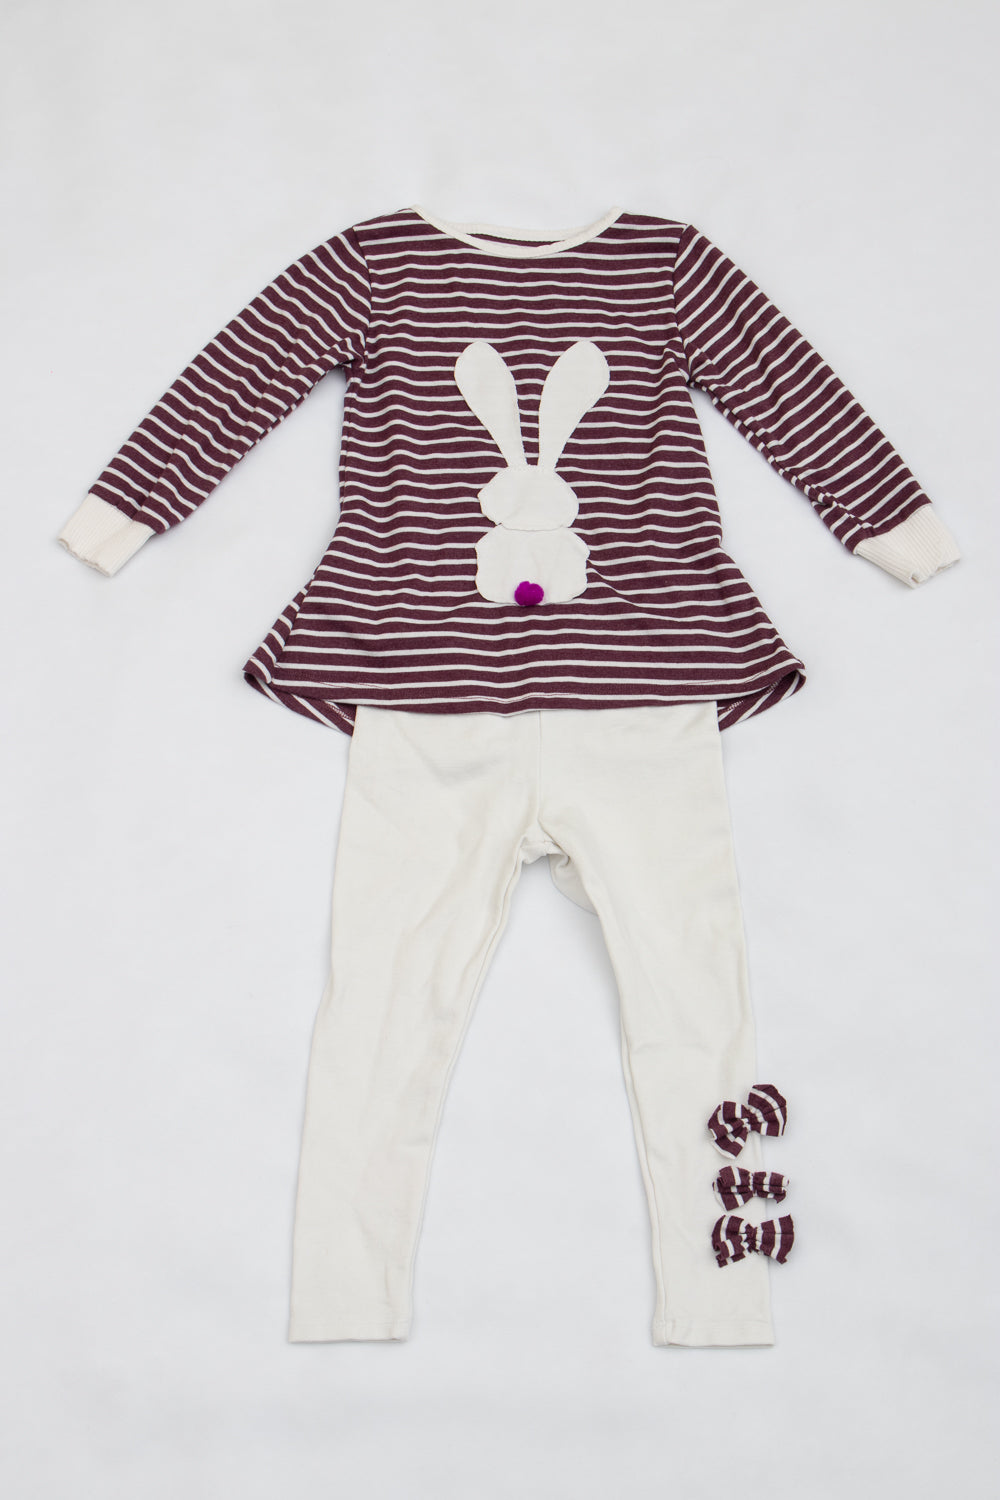 Cute Bunny Tail Silhouette Deco Blouse and Pants  Set for Girls 2-10 yrs old